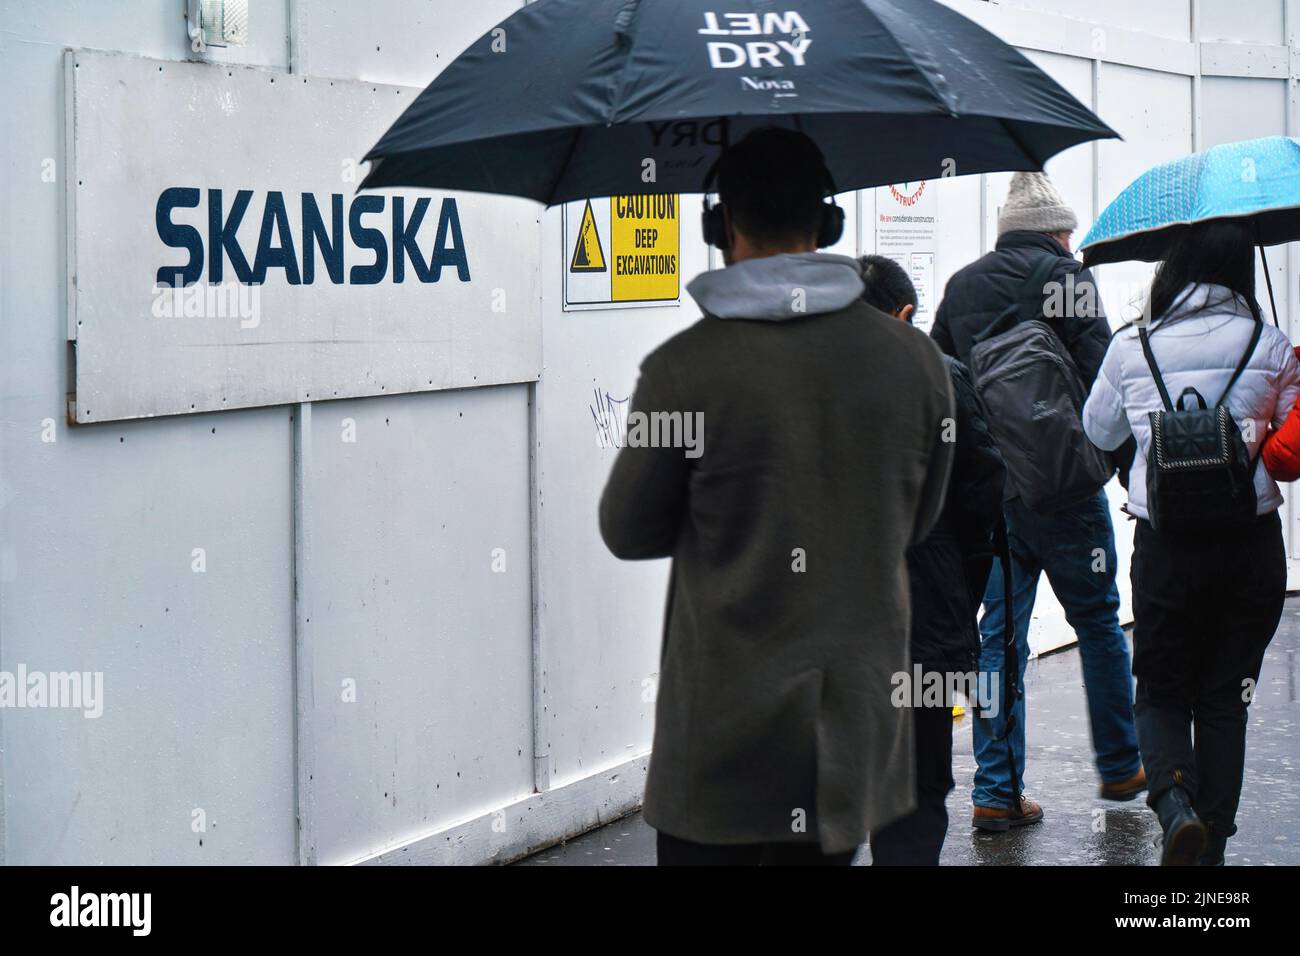 London, United Kingdom - February 01, 2019: Pedestrians with umbrellas walking near wooden barrier at construction site with label Skanska. It is Swed Stock Photo